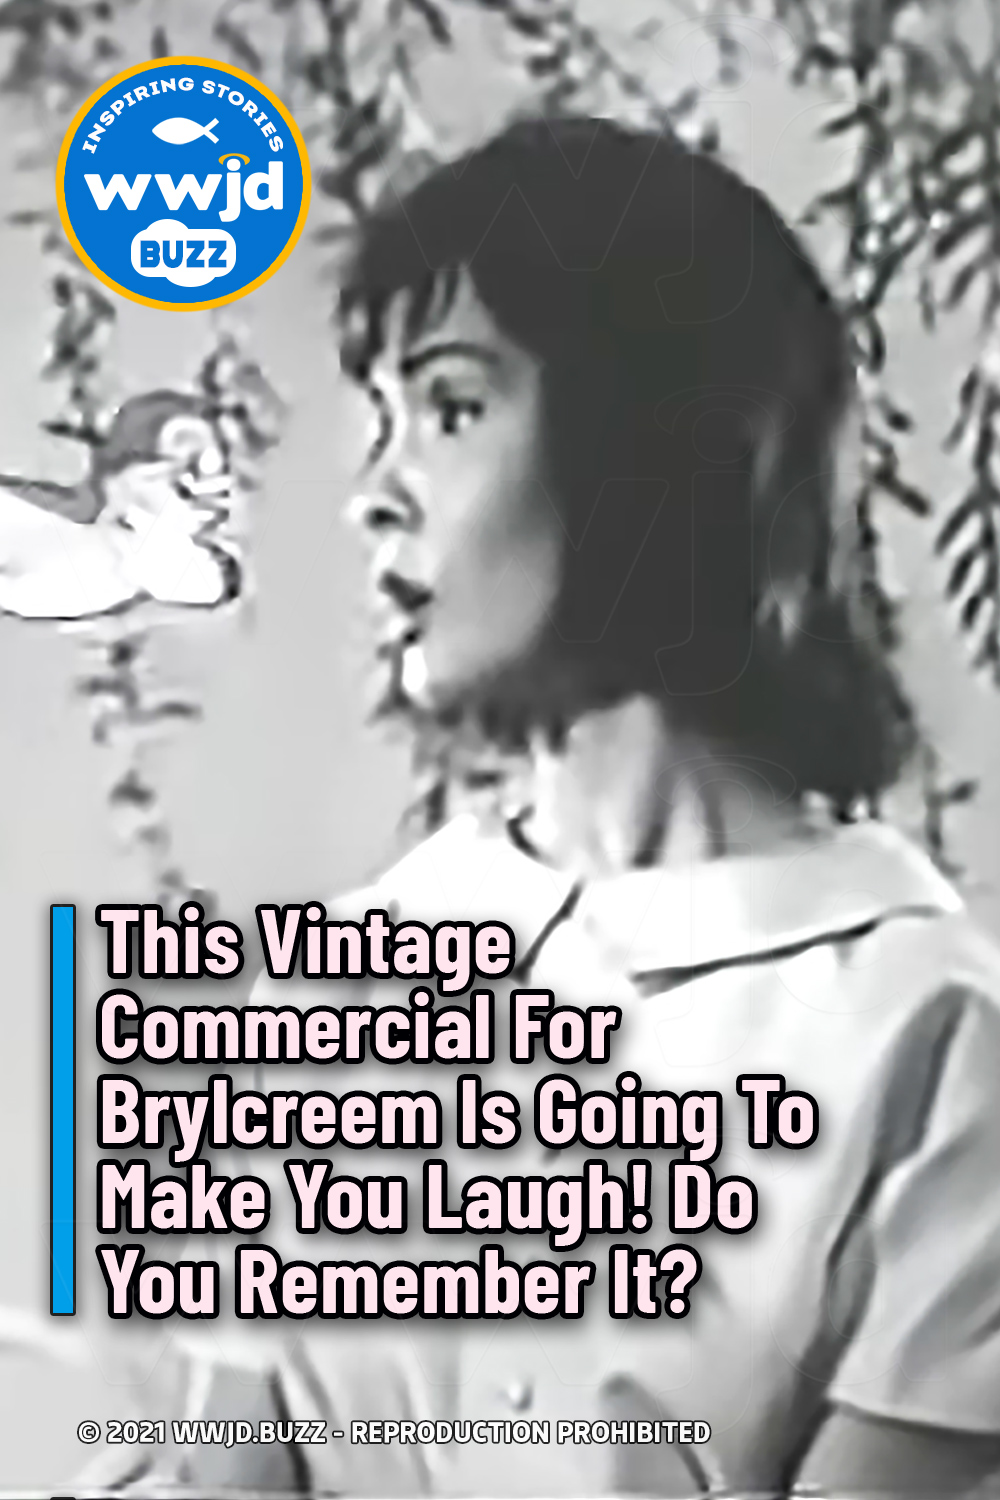 This Vintage Commercial For Brylcreem Is Going To Make You Laugh! Do You Remember It?